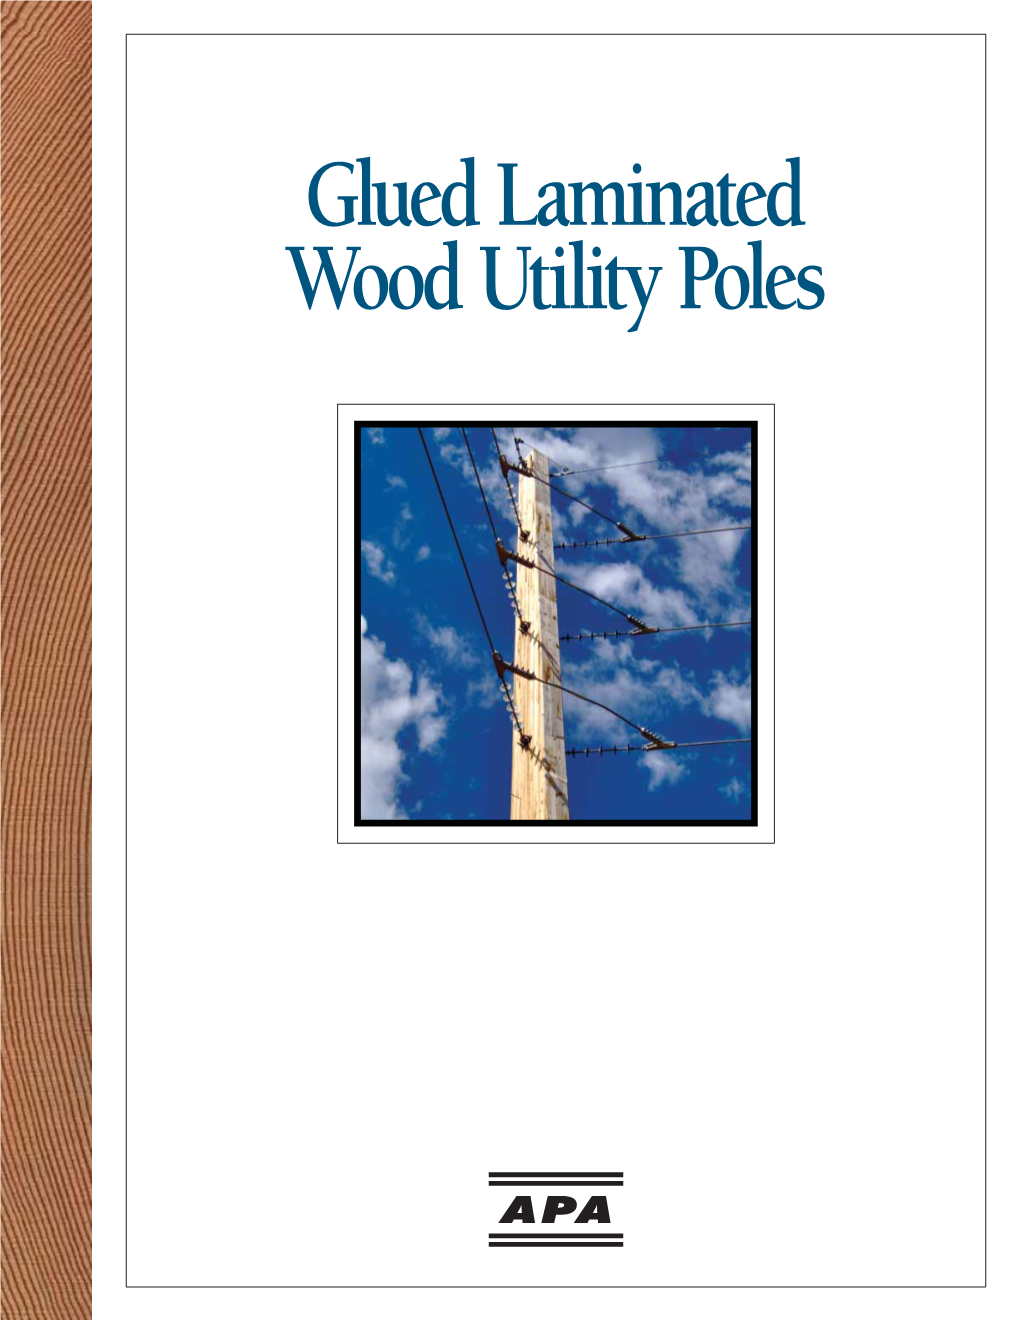 Glued Laminated Wood Utility Poles Glulam Is a Bright Idea for the Utility Industry